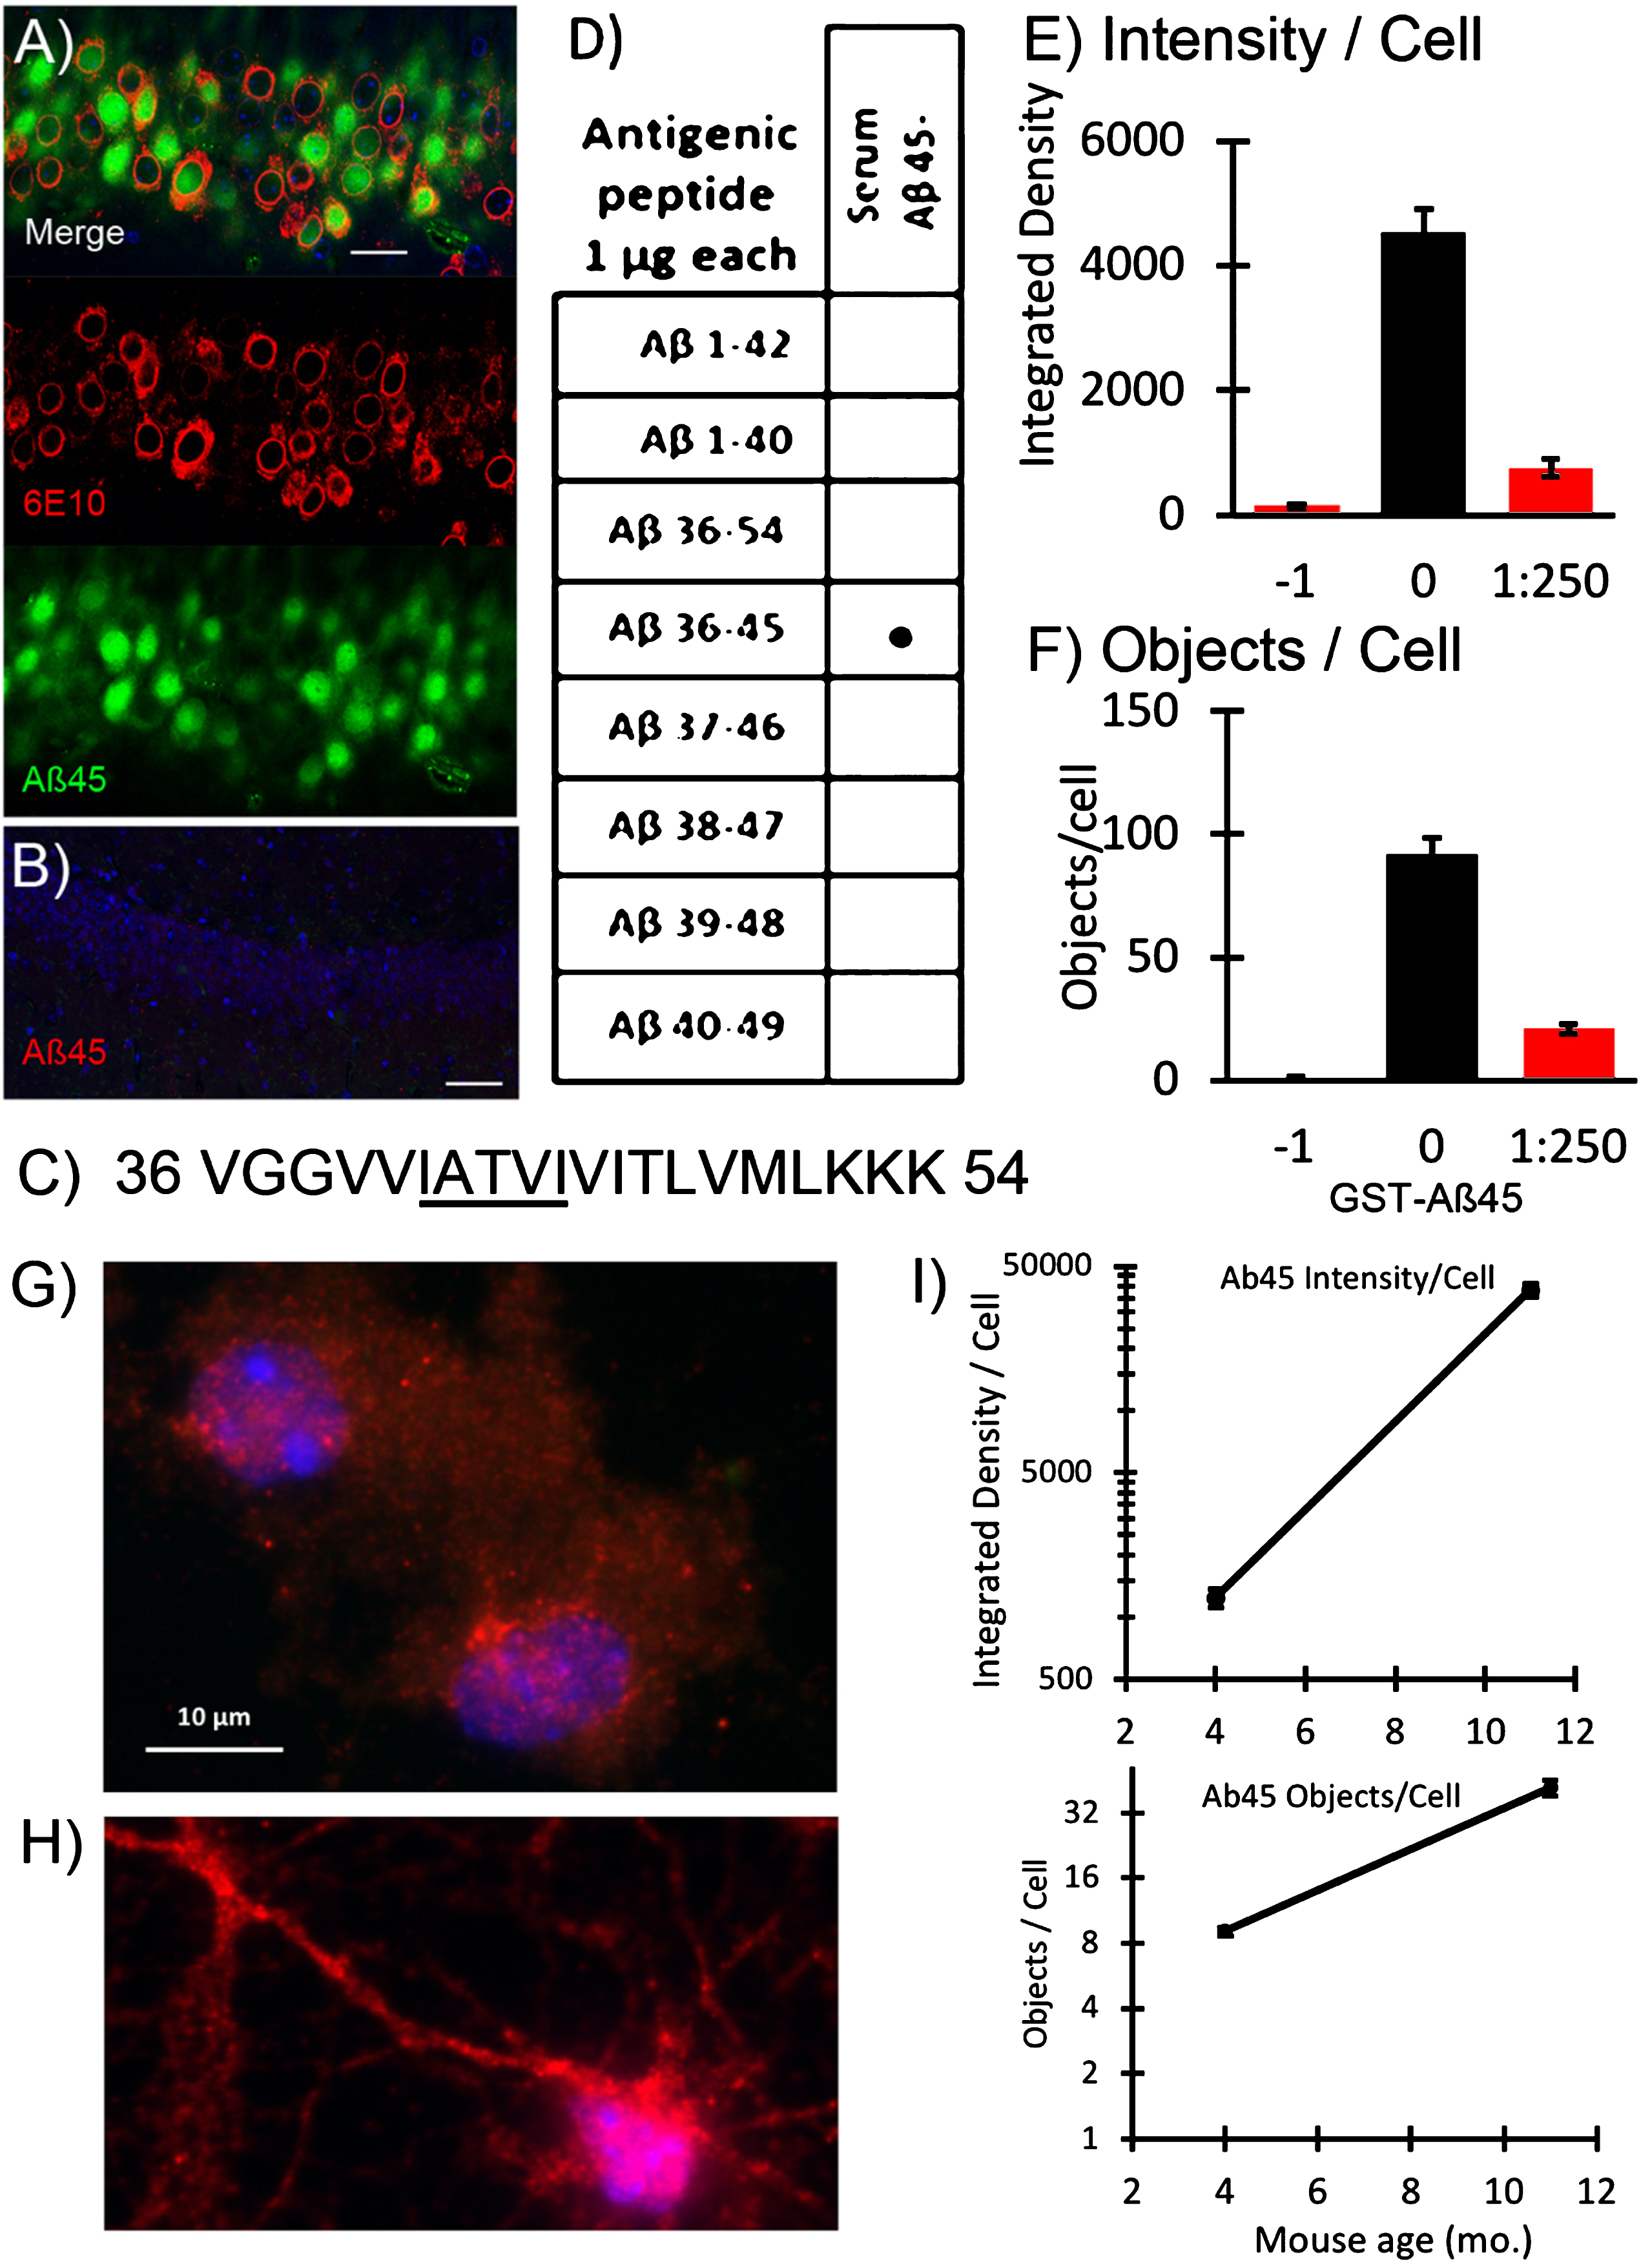 Prominent long form of intracellular Aβ45 increases with age of neurons. A new C-terminal antiserum identified iAβ45 (red) compared to N-terminal 6E10 (green) in CA1 of A) 2-month-old 5xTg-AD and B) 14-month-old non-Tg mouse. C) AβPP sequence from residues 36–54 of the Aβ sequence with residues 41–45 underlined. D) Specificity of serum Aβ45 for only its own antigenic peptide on dot blot. E) Competitive antigen adsorption of the Aβ45 antiserum: –1 is no Aβ45 antiserum, just secondary antibody; 0 is Aβ45 antiserum with no antigen adsorption; 1:250 is dilution of GST-Aβ45 conjugate premixed with Aβ45 antiserum before binding to cells (n = 33–47 cells, file 180608). G) Aβ45 immunoreactivity in 4-month-old male 3xTg-AD neurons compared to H) neurons from an 11-month-old mouse cultured at the same time and co-processed. I) Average integrated intensity of iAβ45 immunoreactivity per cell and objects per cell with age. Note log scale. Control staining for neurons treated without primary antibody was a density of 113 and 0.2 objects per cell for 4-month neurons; for 11-month neuron density was 442 and 0.1 objects per cell (N = 35–79 cells each; standard error bars are slightly larger than symbols, file 180329).